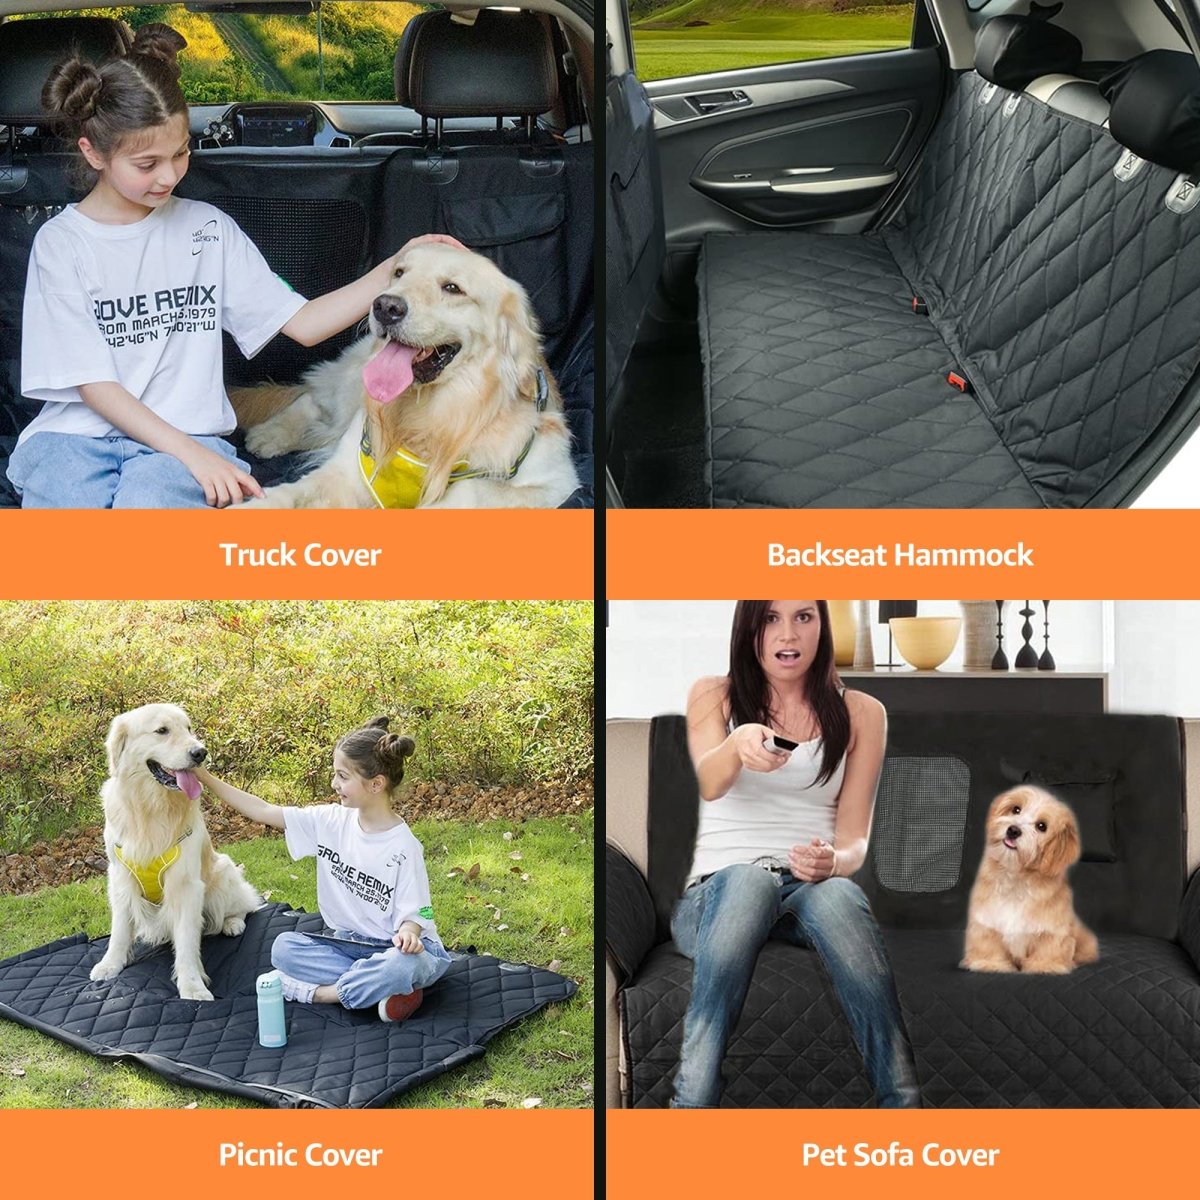 Dog Car Seat Cover, Waterproof Nonslip Pet Seat Cover for Back Seat, Mesh Visual Window, Heavy Duty